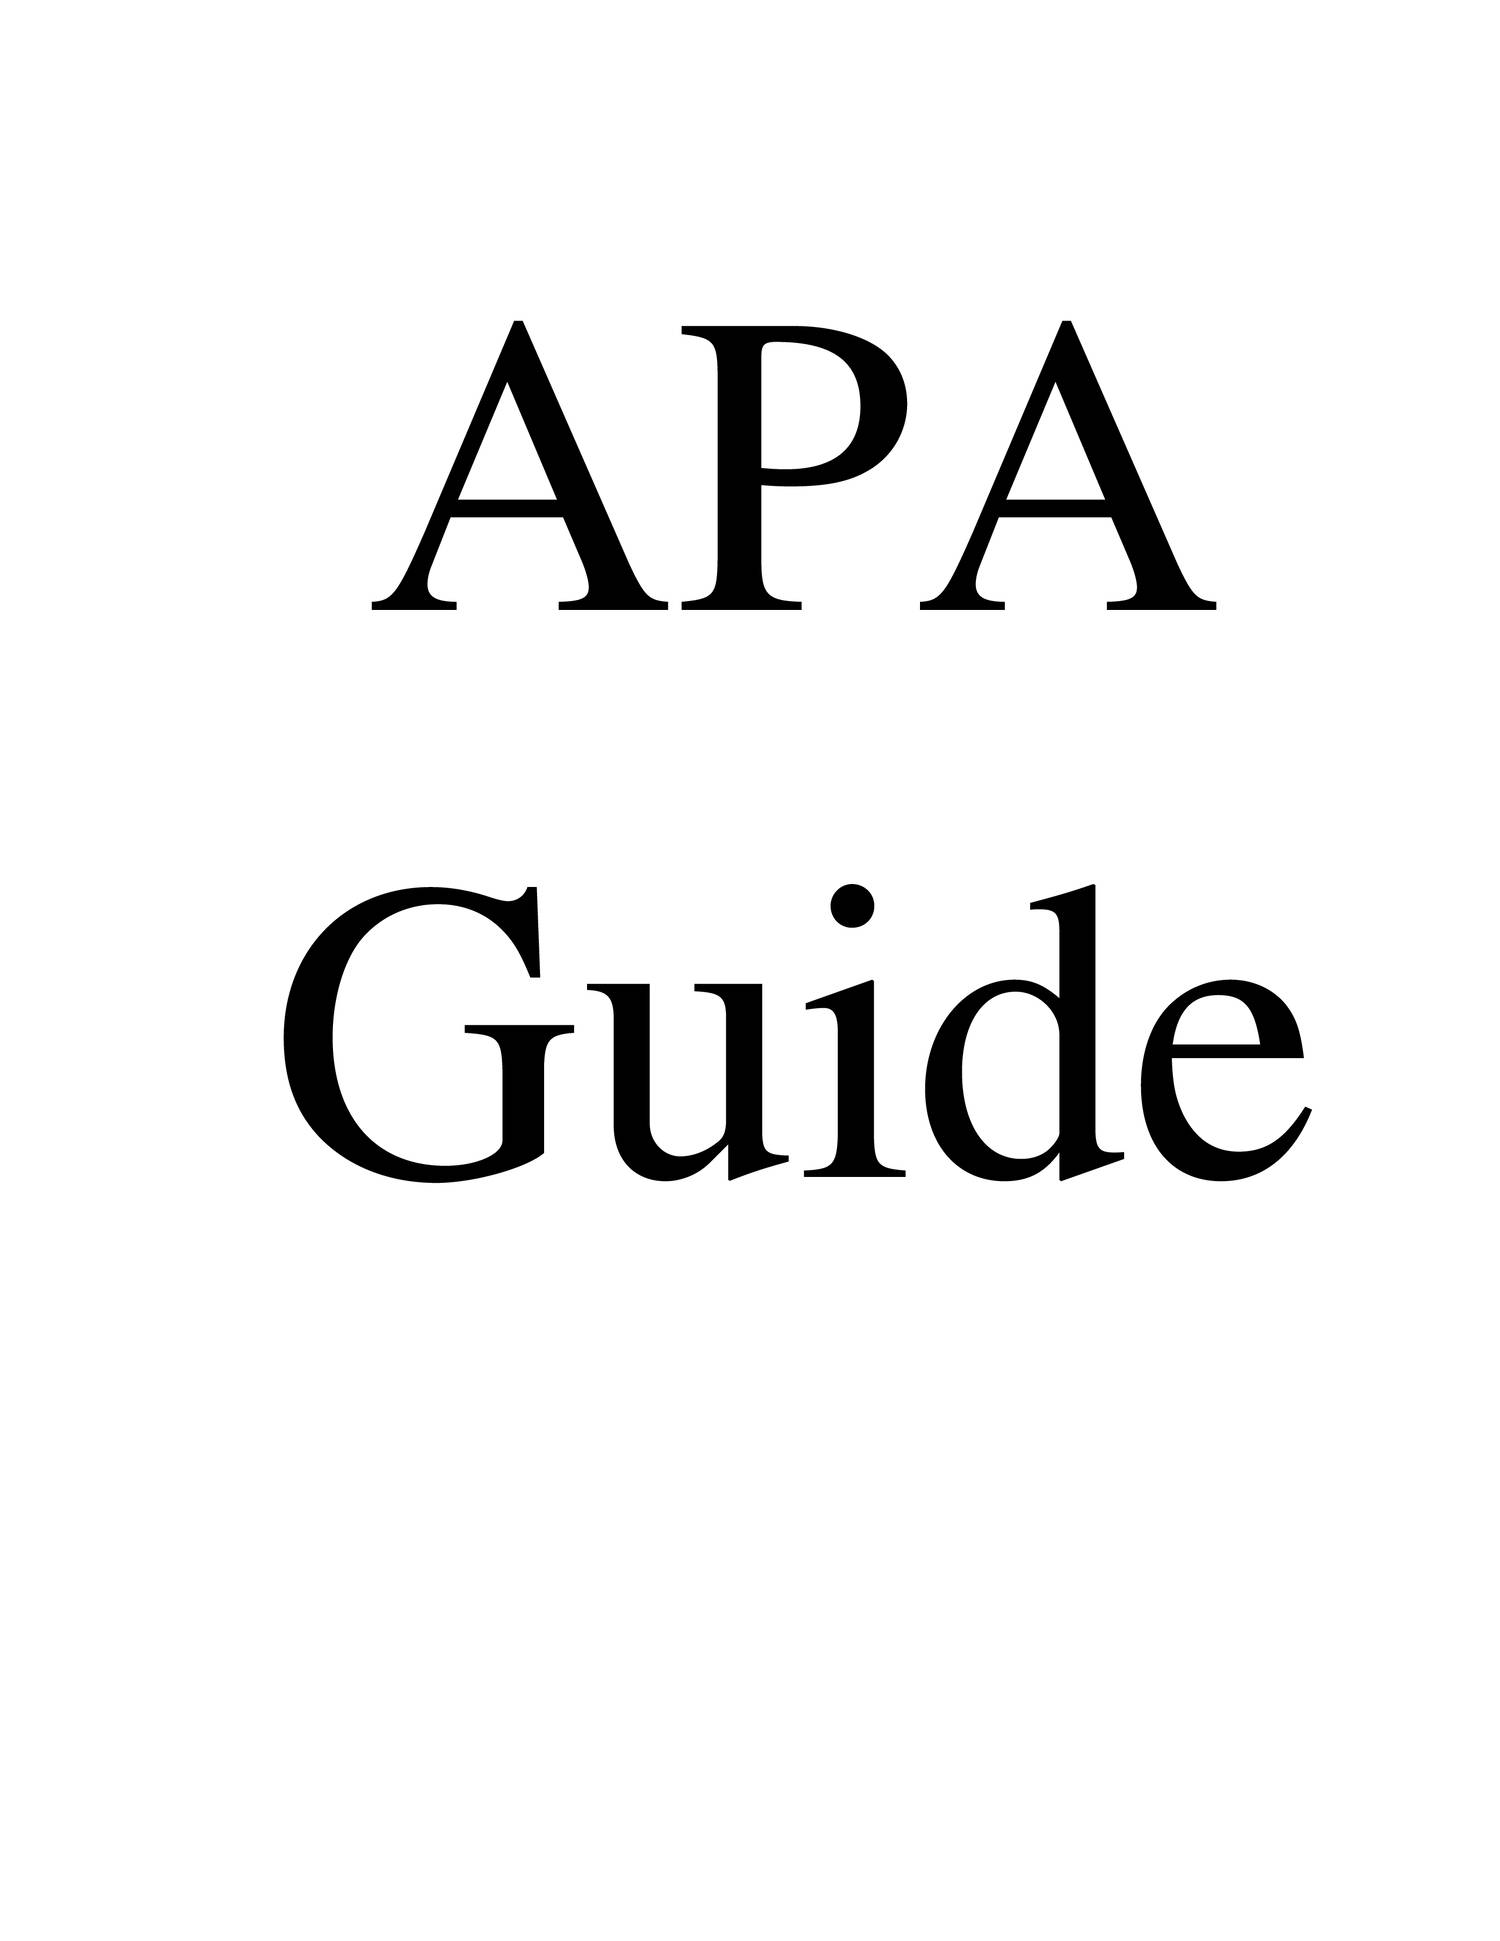 APA quick reference guide.pdf | DocDroid